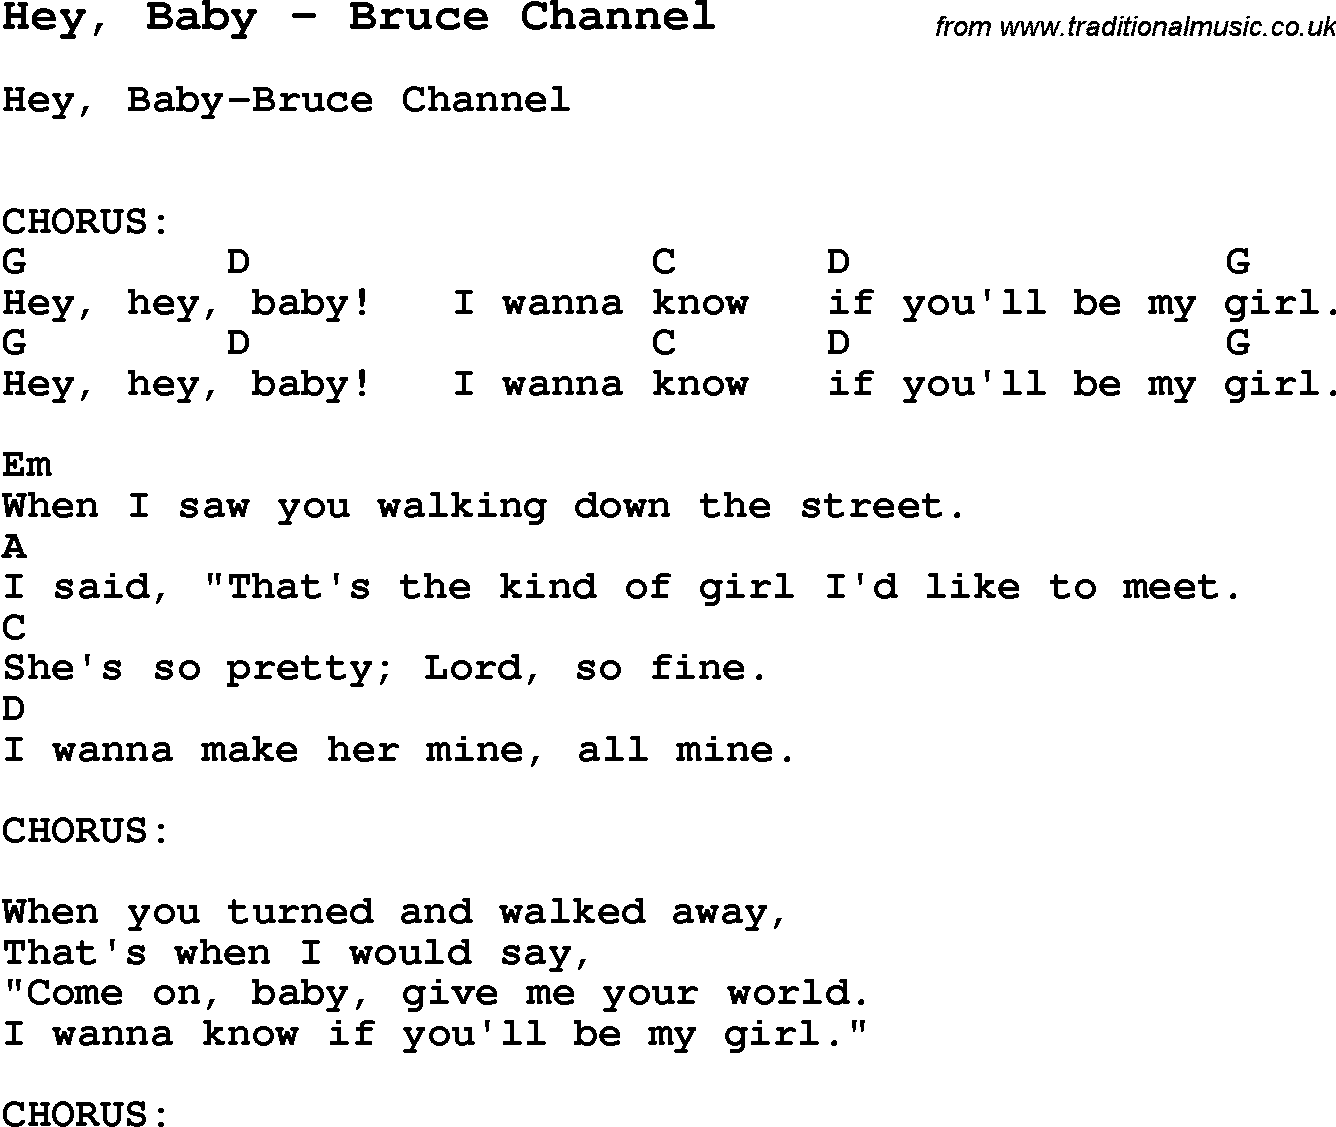 Song Hey, Baby by Bruce Channel, with lyrics for vocal performance and accompaniment chords for Ukulele, Guitar Banjo etc.